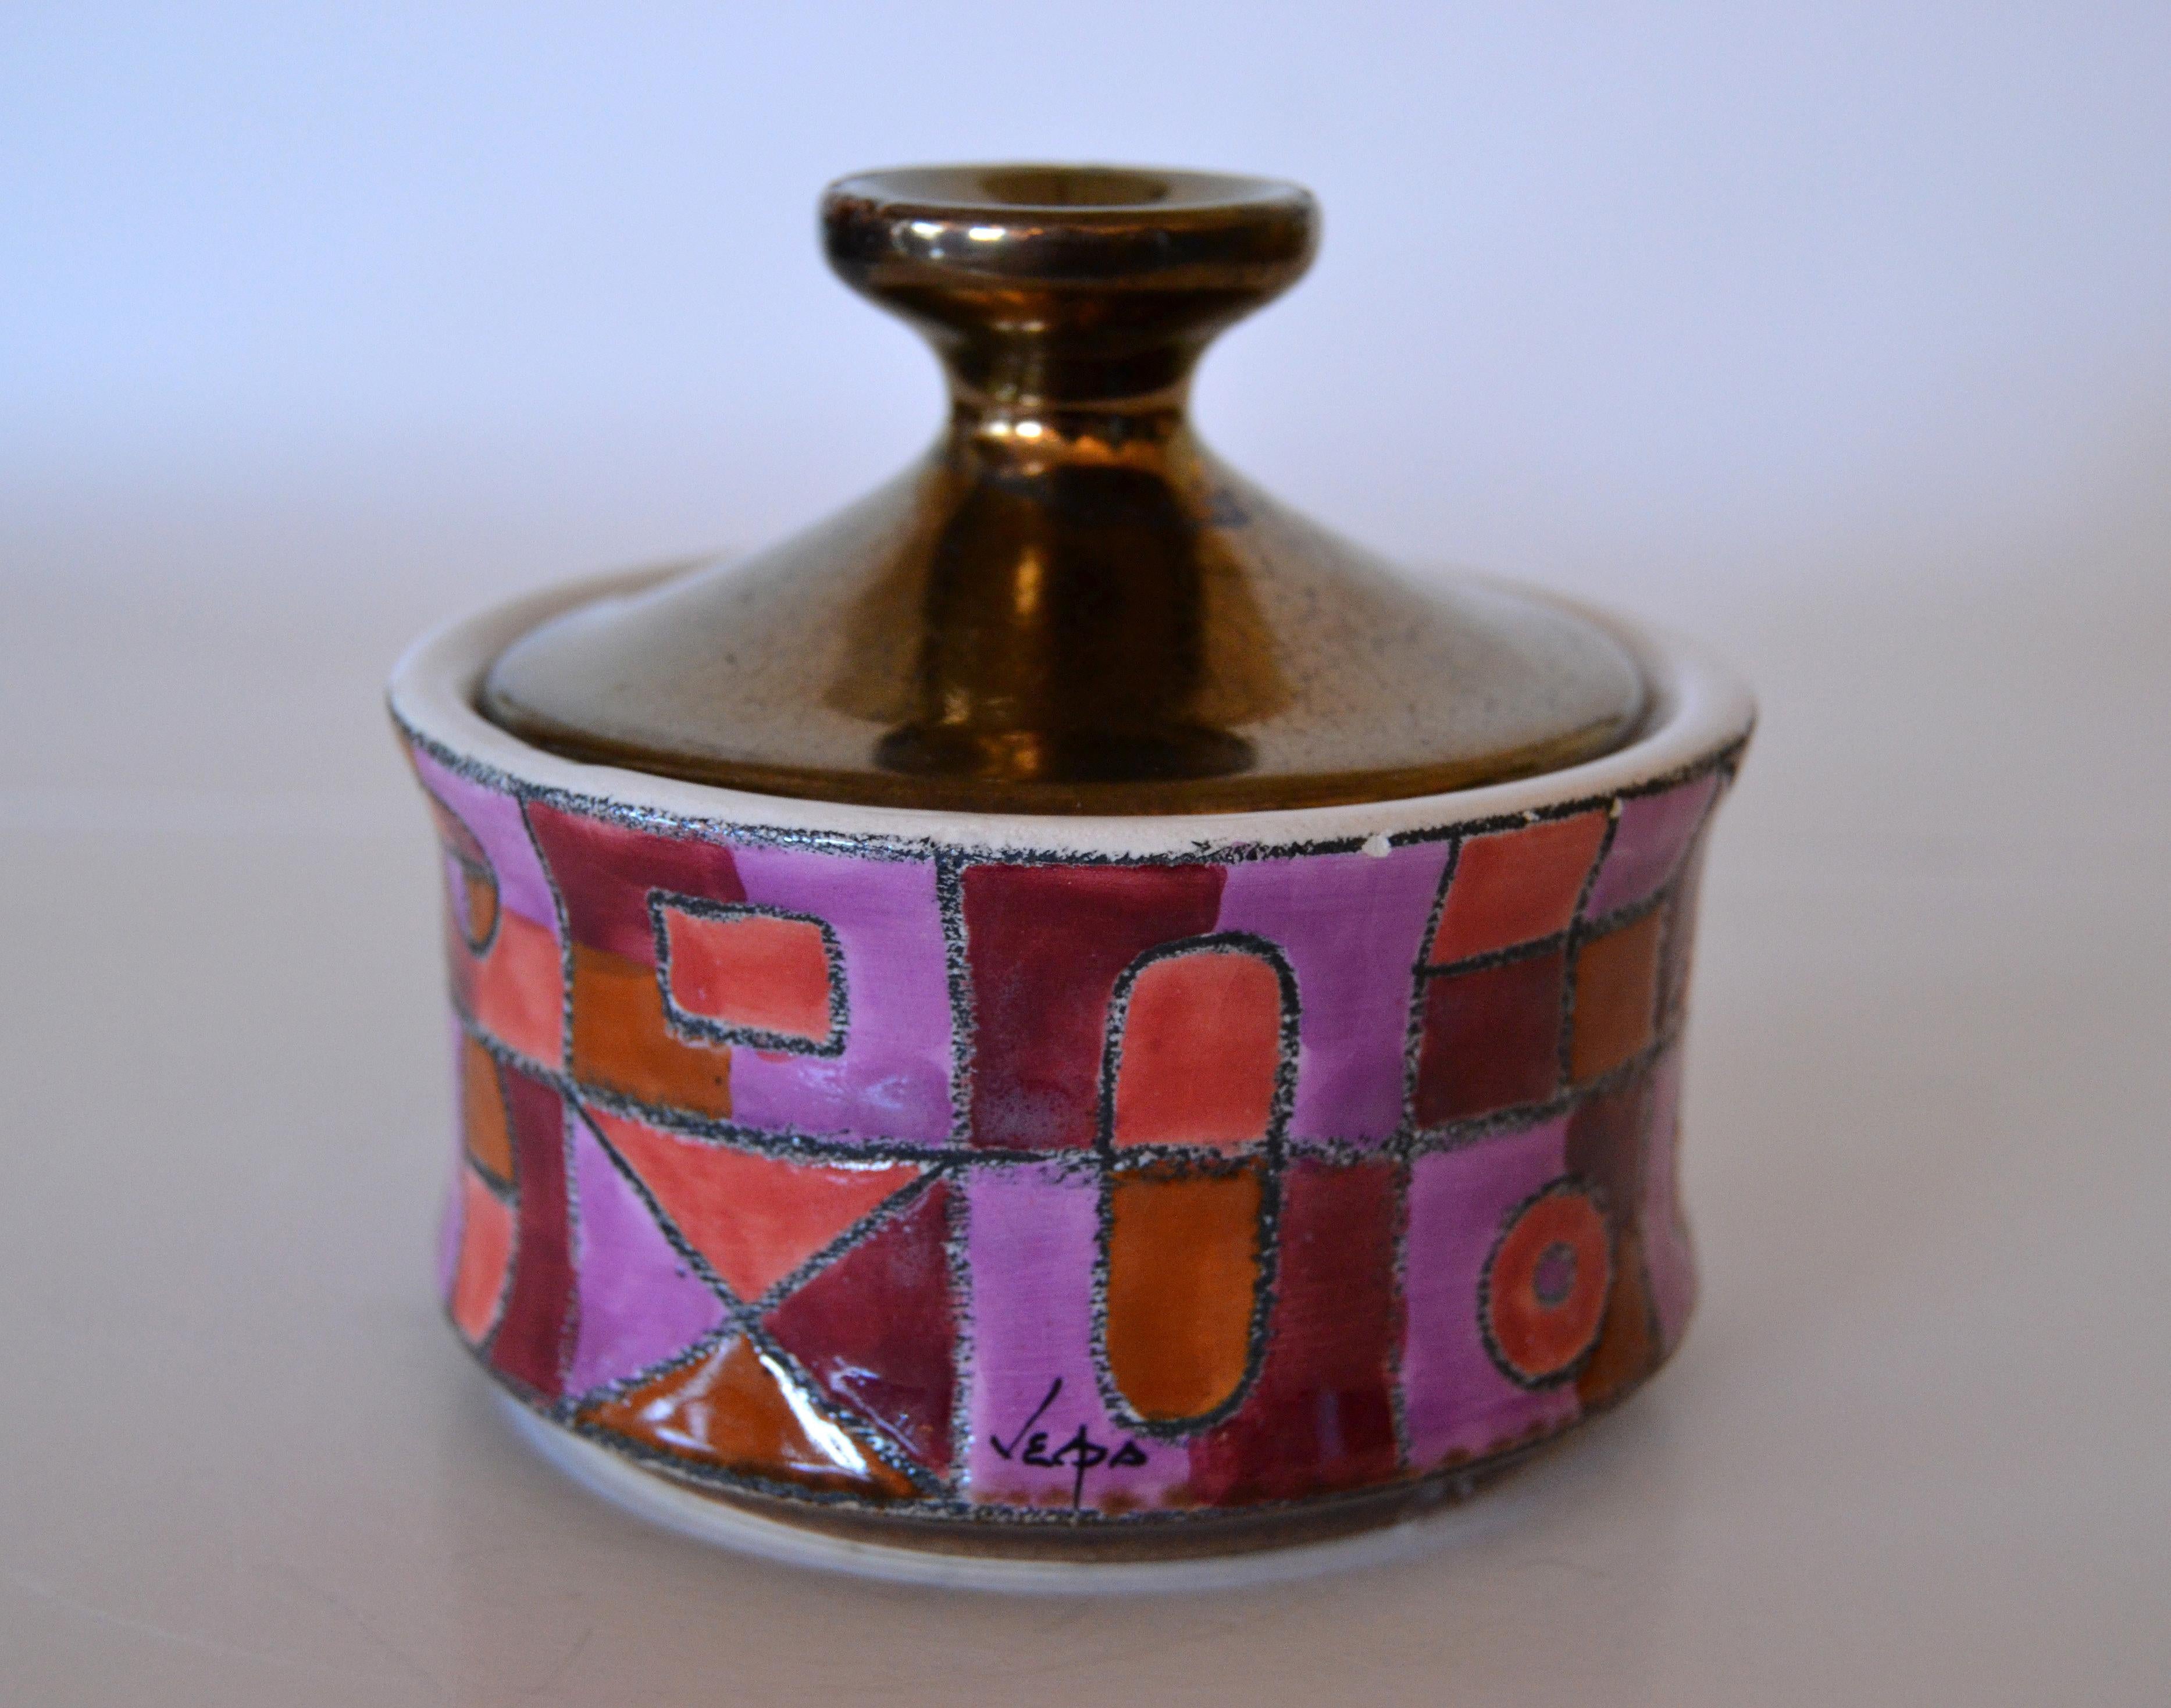 Marked ceramic sugar bowl with lid in purple, bronze and shades of maroon color.
Trademark at the base.